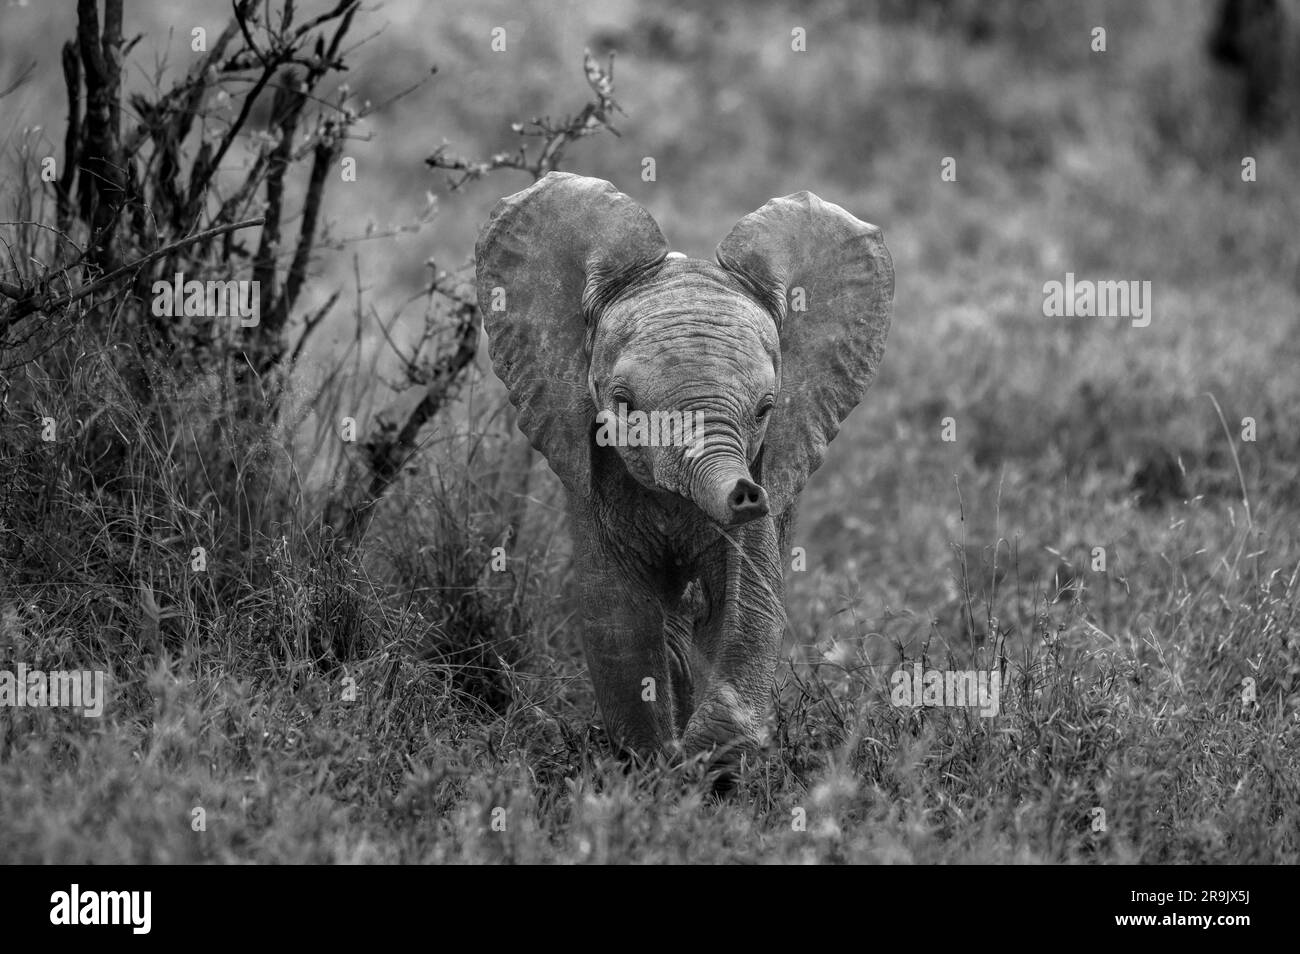 A baby elephant, Loxodonta africana, using its trunk to smell, in black and white. Stock Photo